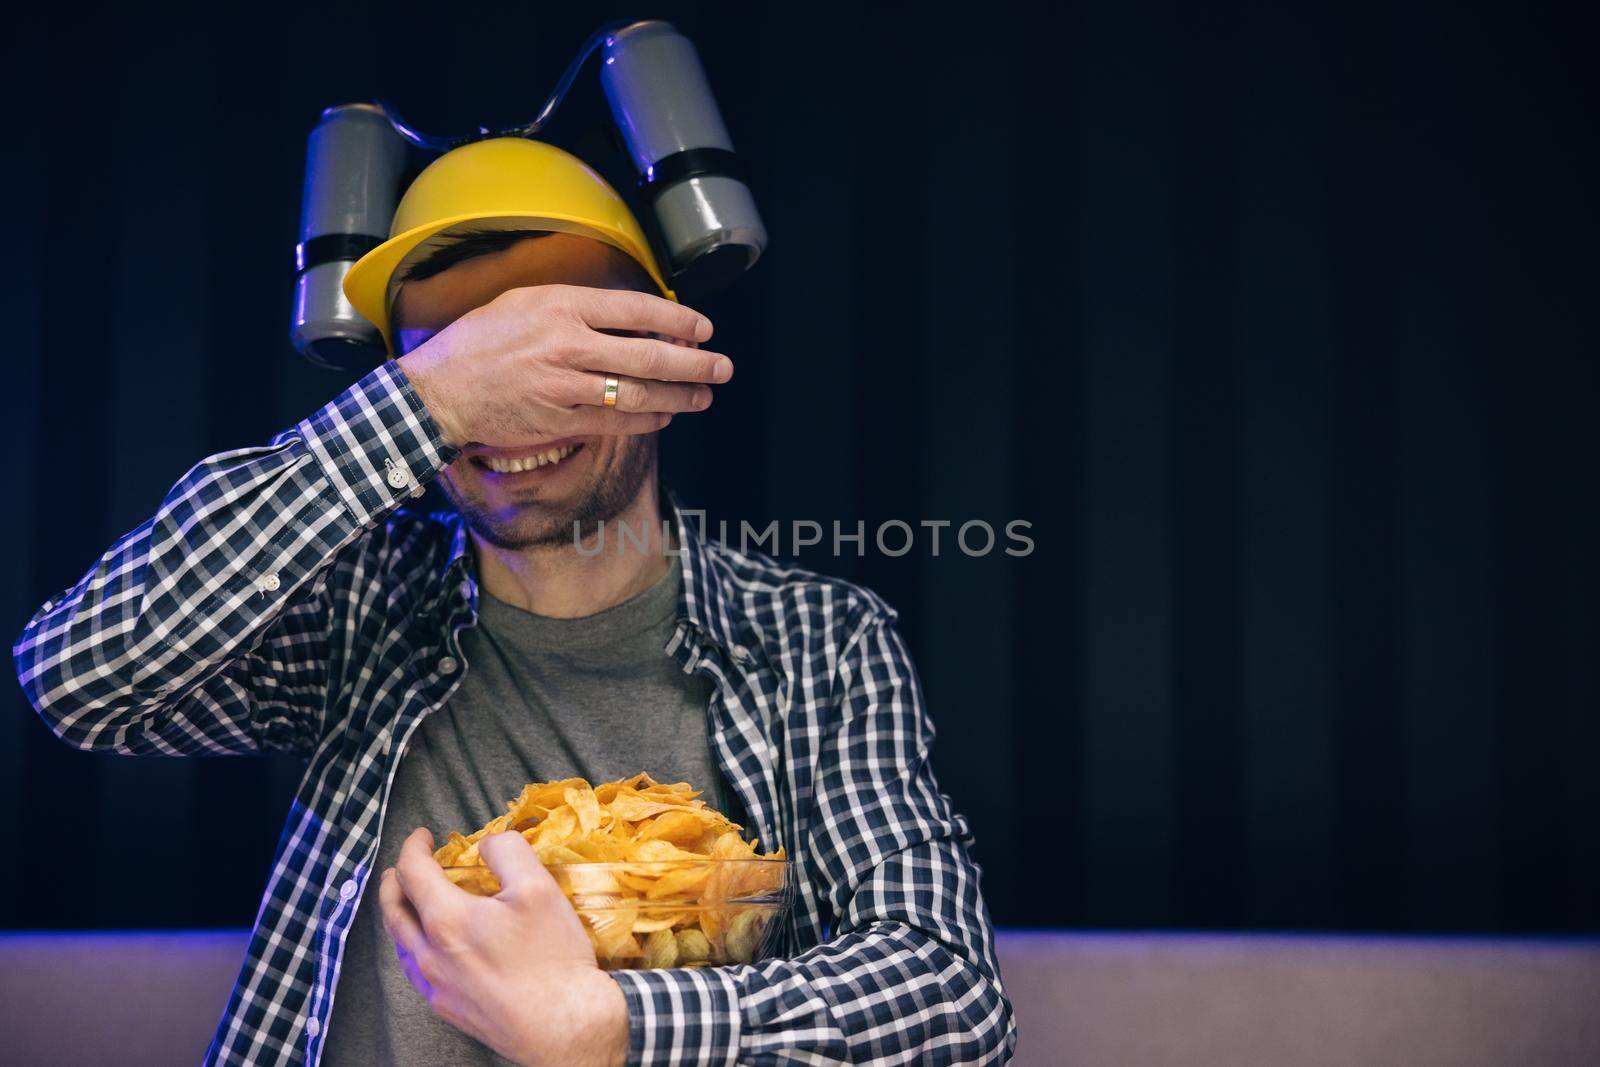 Caucasian man rests at home and watches TV shows or sports news on TV screen. Man with beer helmet on the head eats chips while sitting at home on couch, in evening he watches movies at home on TV.